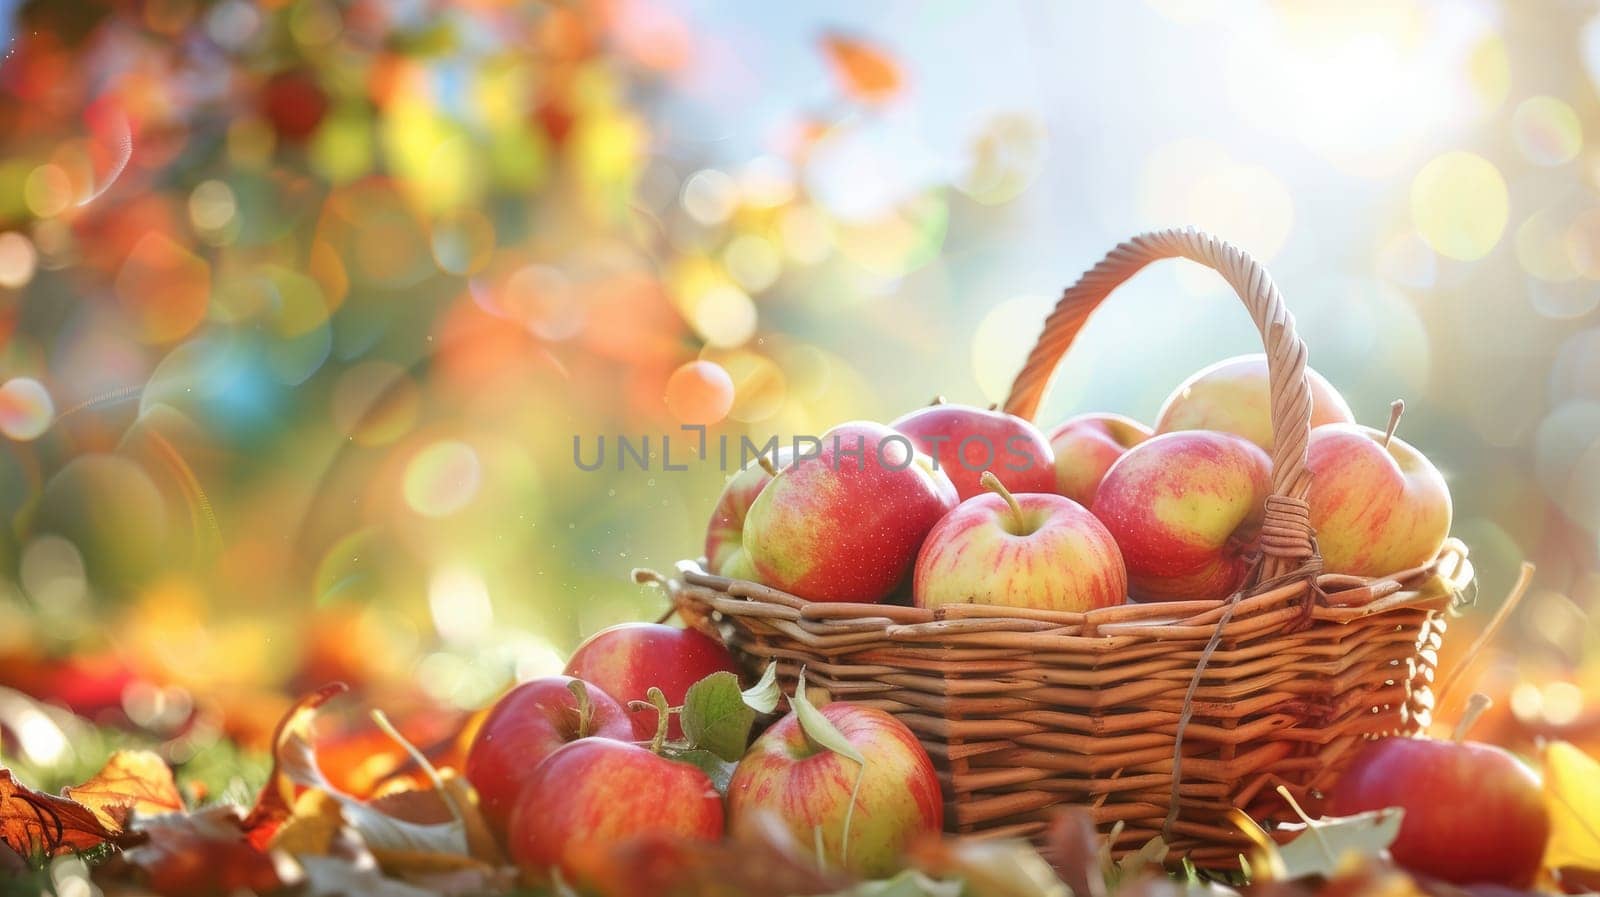 A basket full of apples is sitting on the ground in a field. The apples are ripe and ready to be picked. The basket is woven and has a rustic feel to it. The scene is peaceful and serene